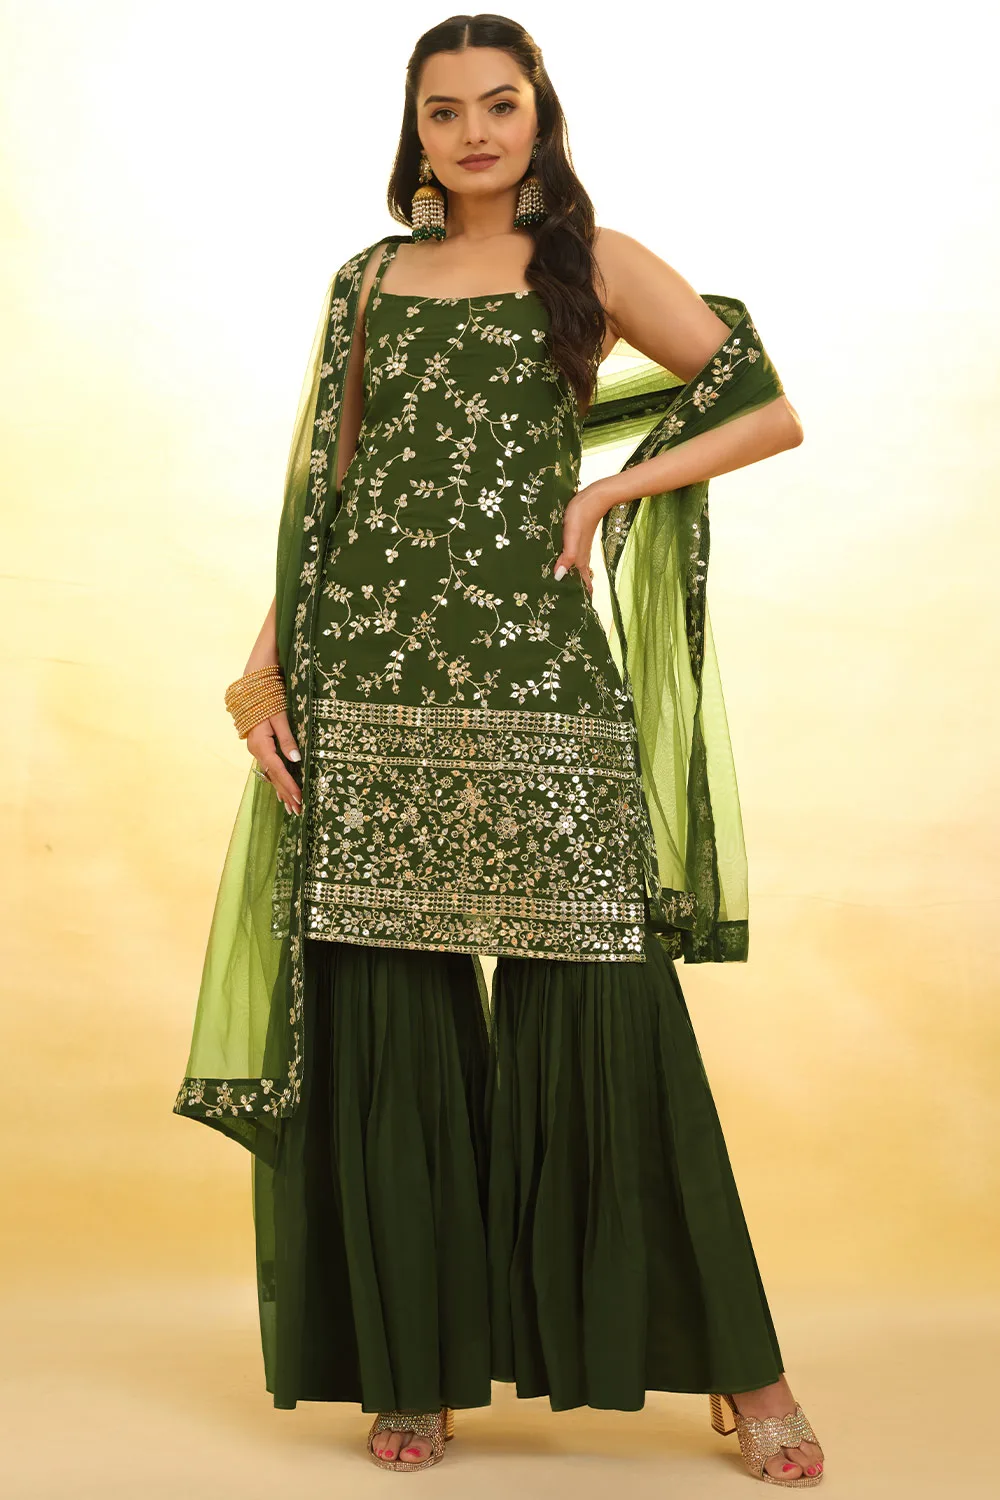 Exquisite Green Georgette Gharara Suit with Intricate Embroidery